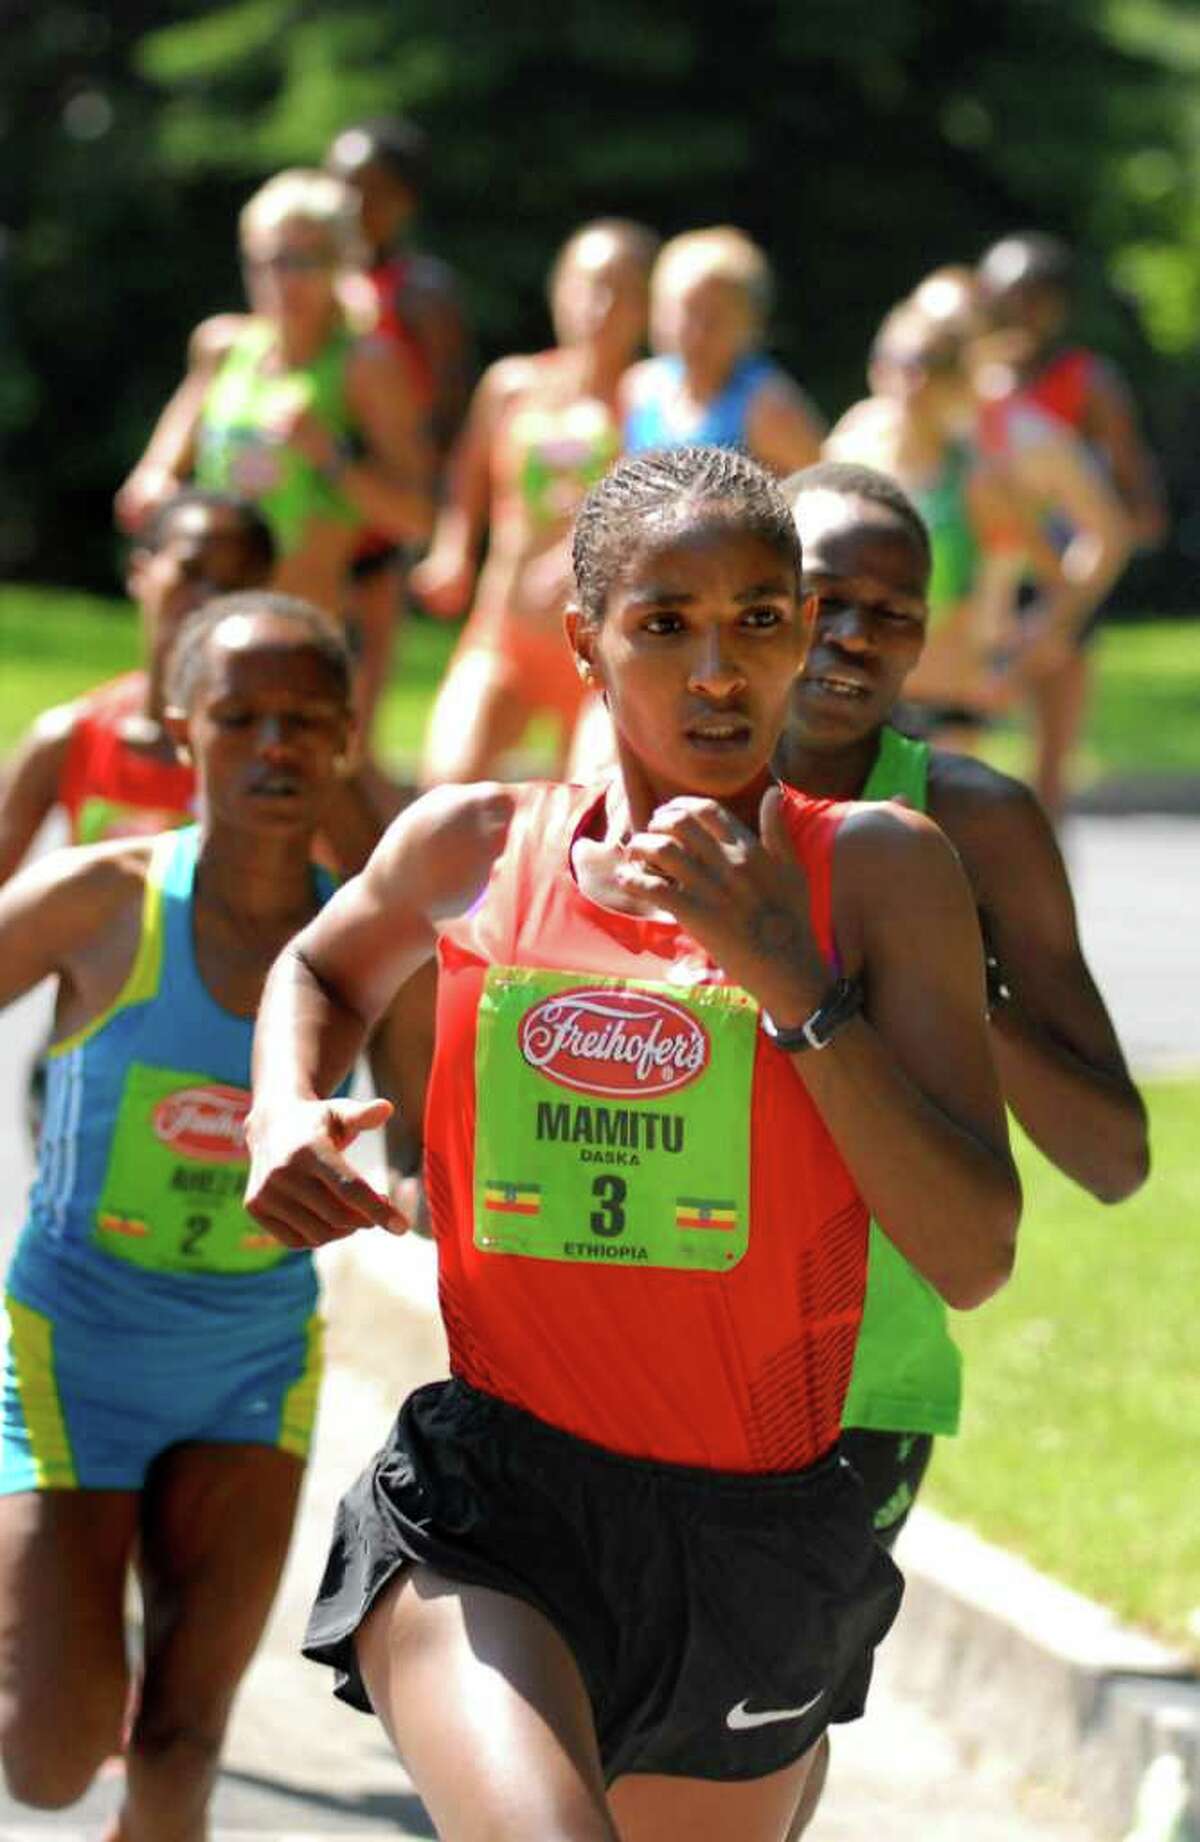 Mamitu Daska (3) of Ethiopia runs in the lead, followed by Emily Chebet and Aheza Kiros during Freihofer's 33rd Run for Women on Saturday, June 4, 2011, in Albany, N.Y. (Cindy Schultz / Times Union)